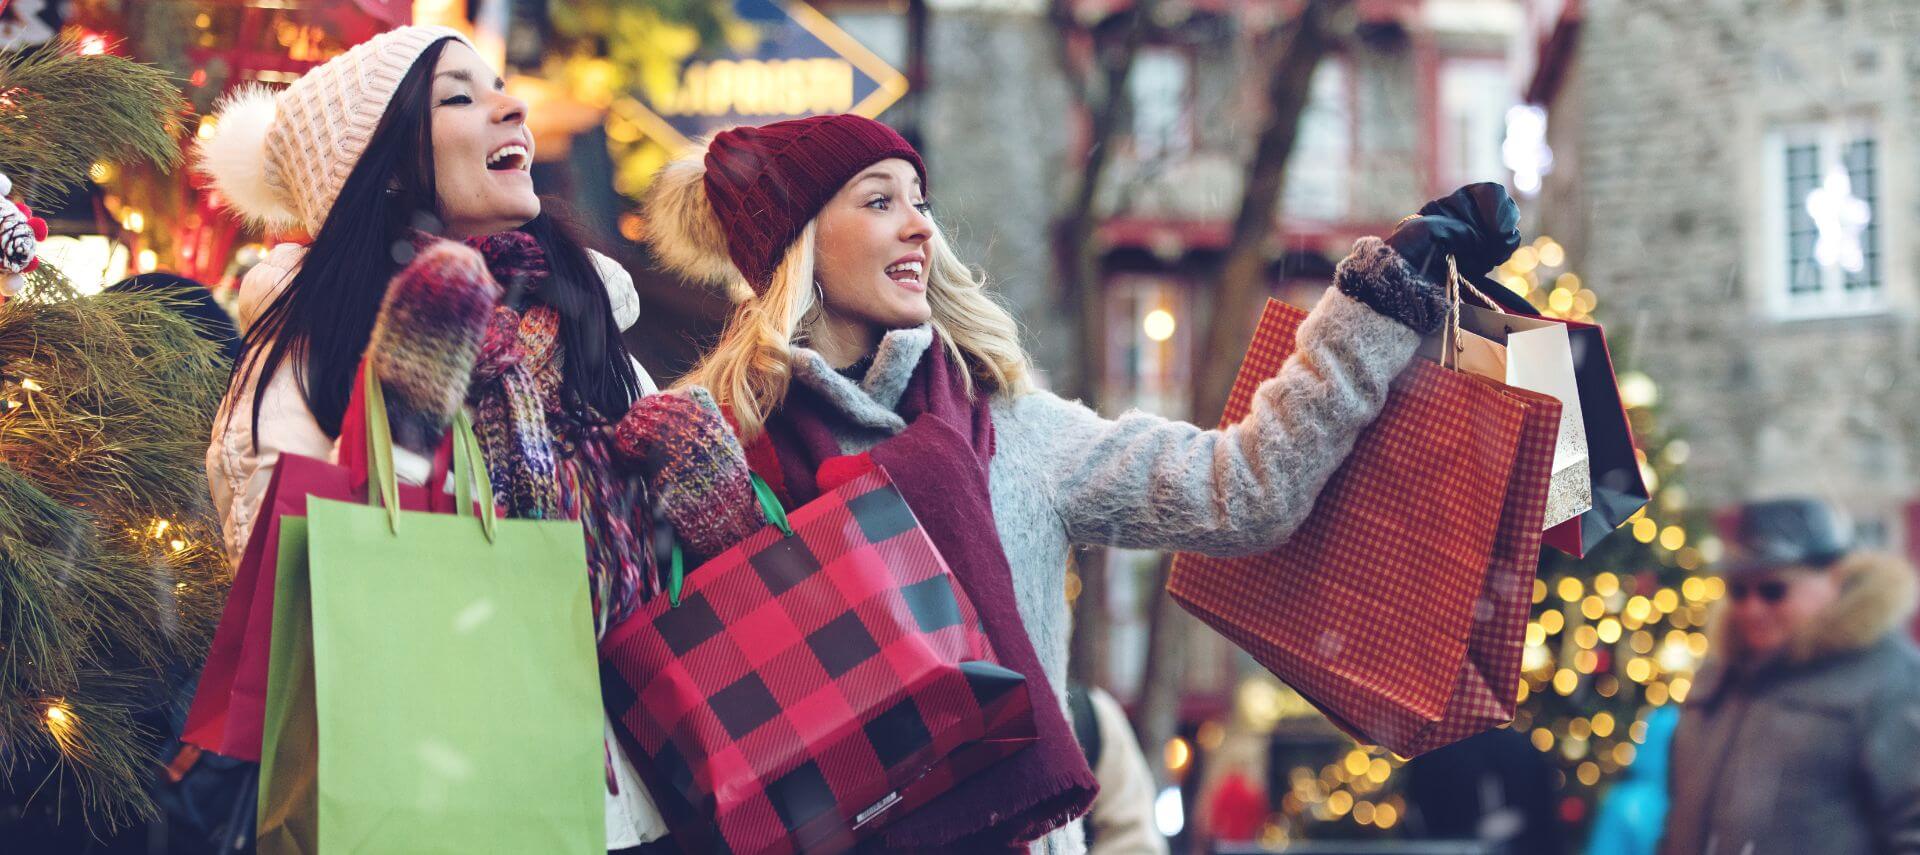 Two women wearing winter hats and holding bags from holiday shopping in a small town.